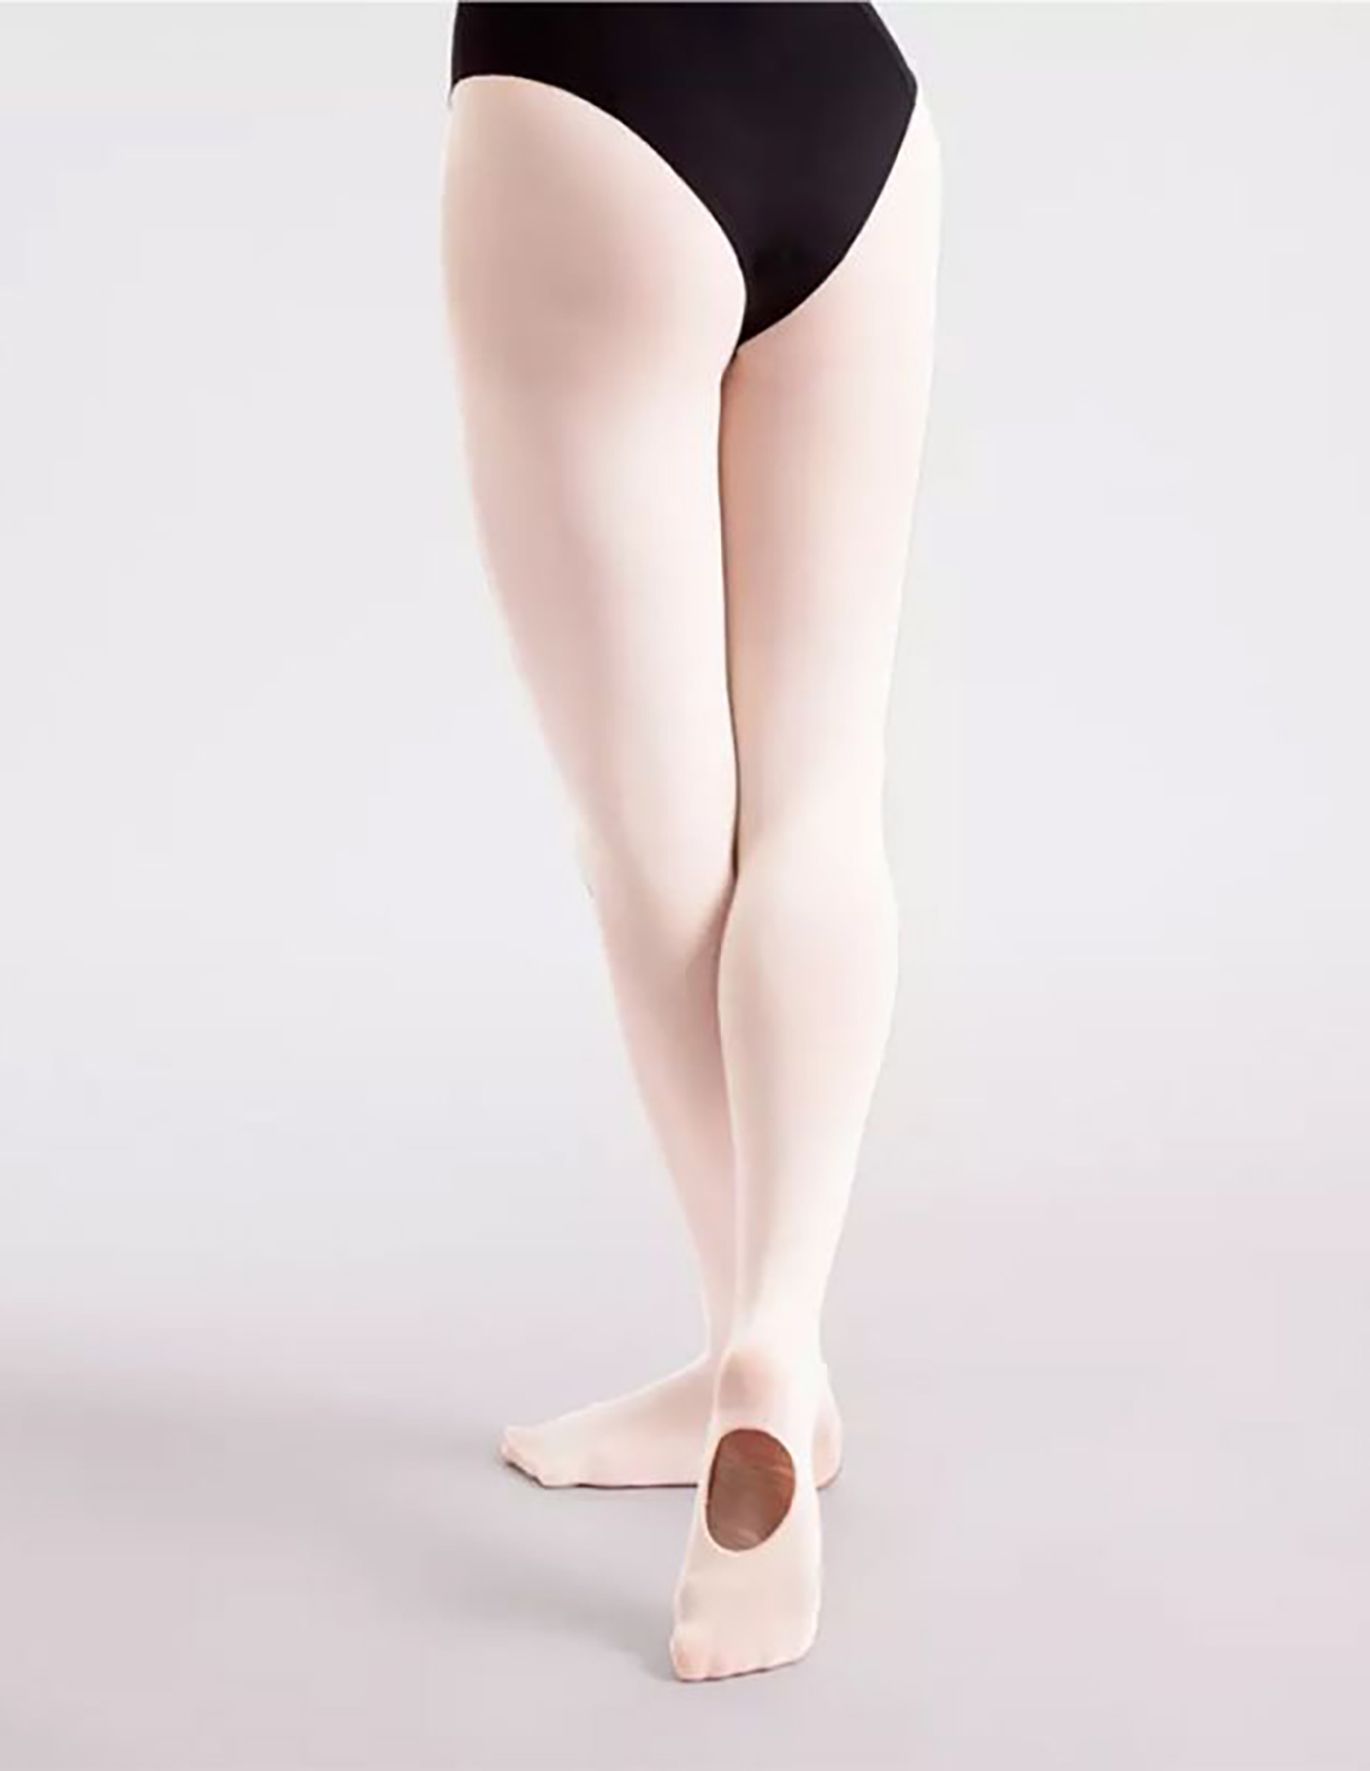 Women's Dance Tights  Convertible, Footed & Stirrup - So Danca UK